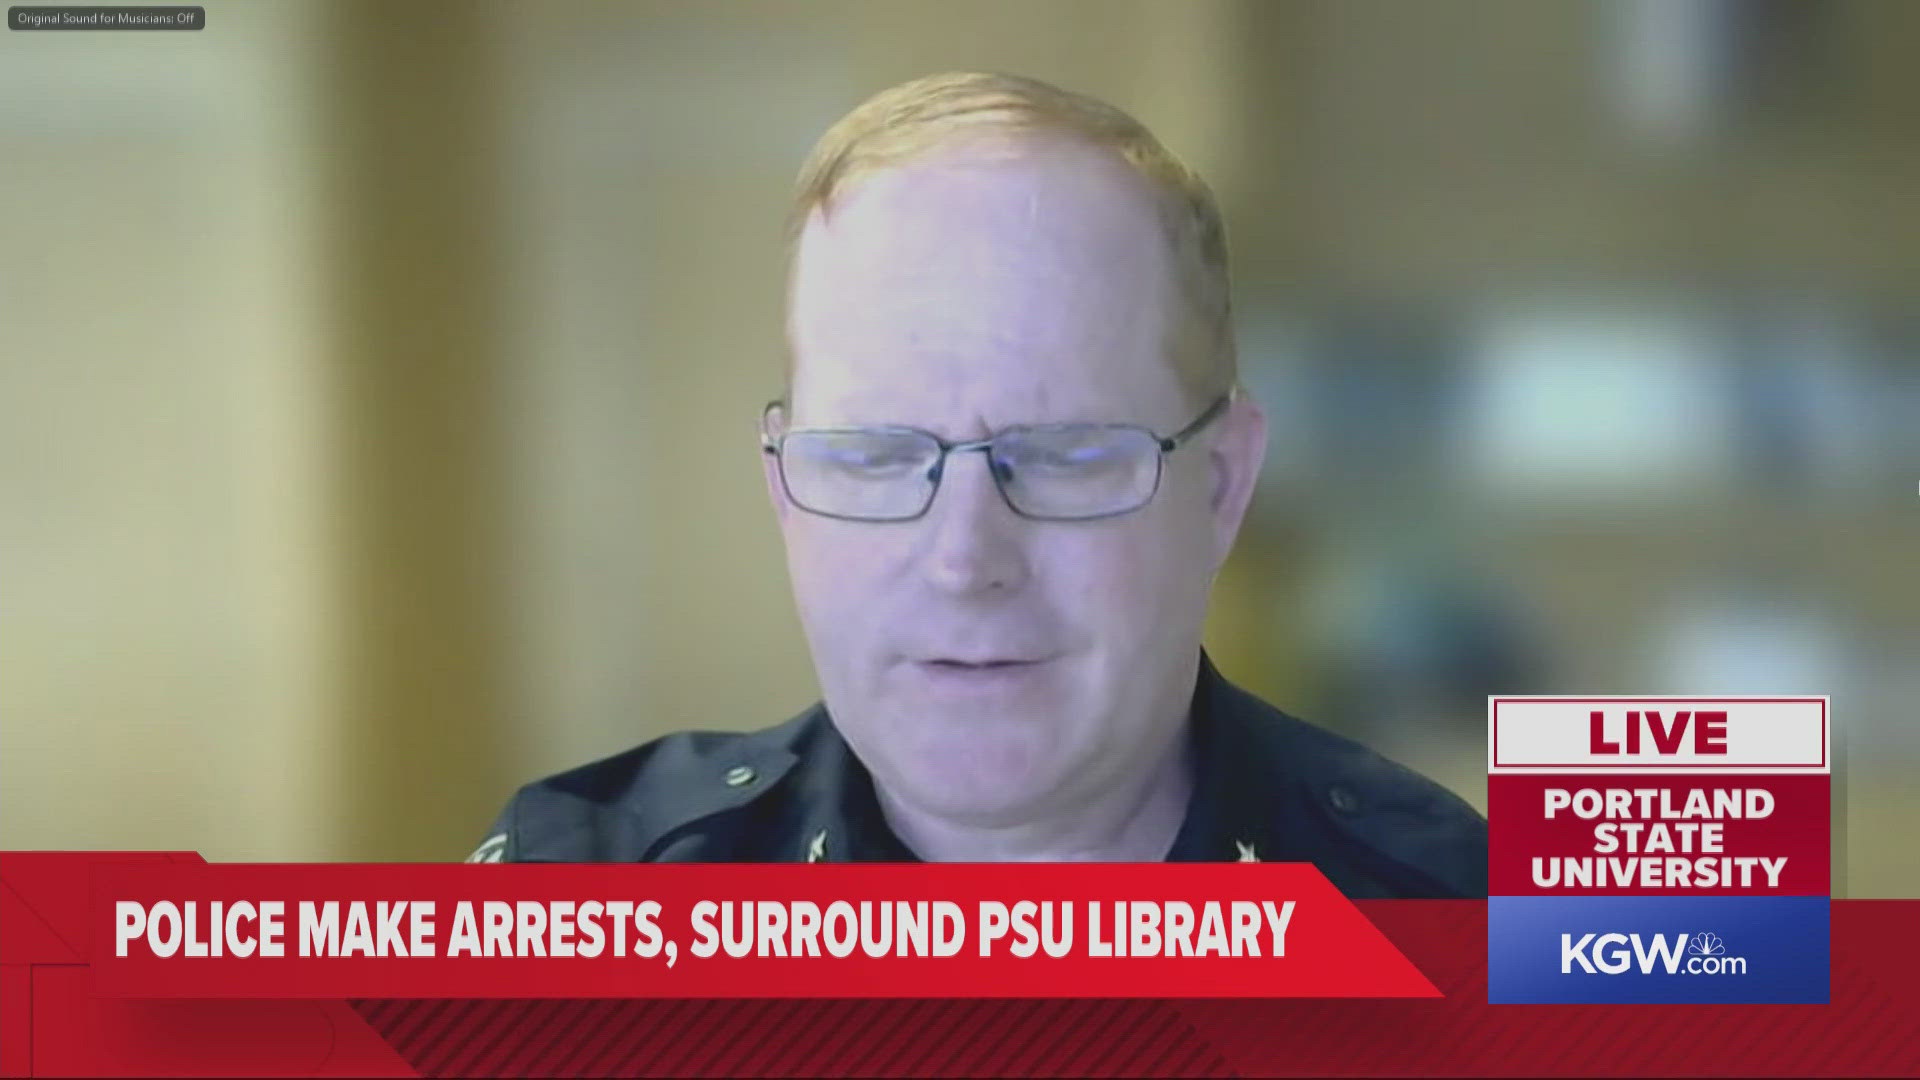 Chief Bob Day called in to discuss the situation at PSU, shortly after a large group of protesters was seen fleeing the library.